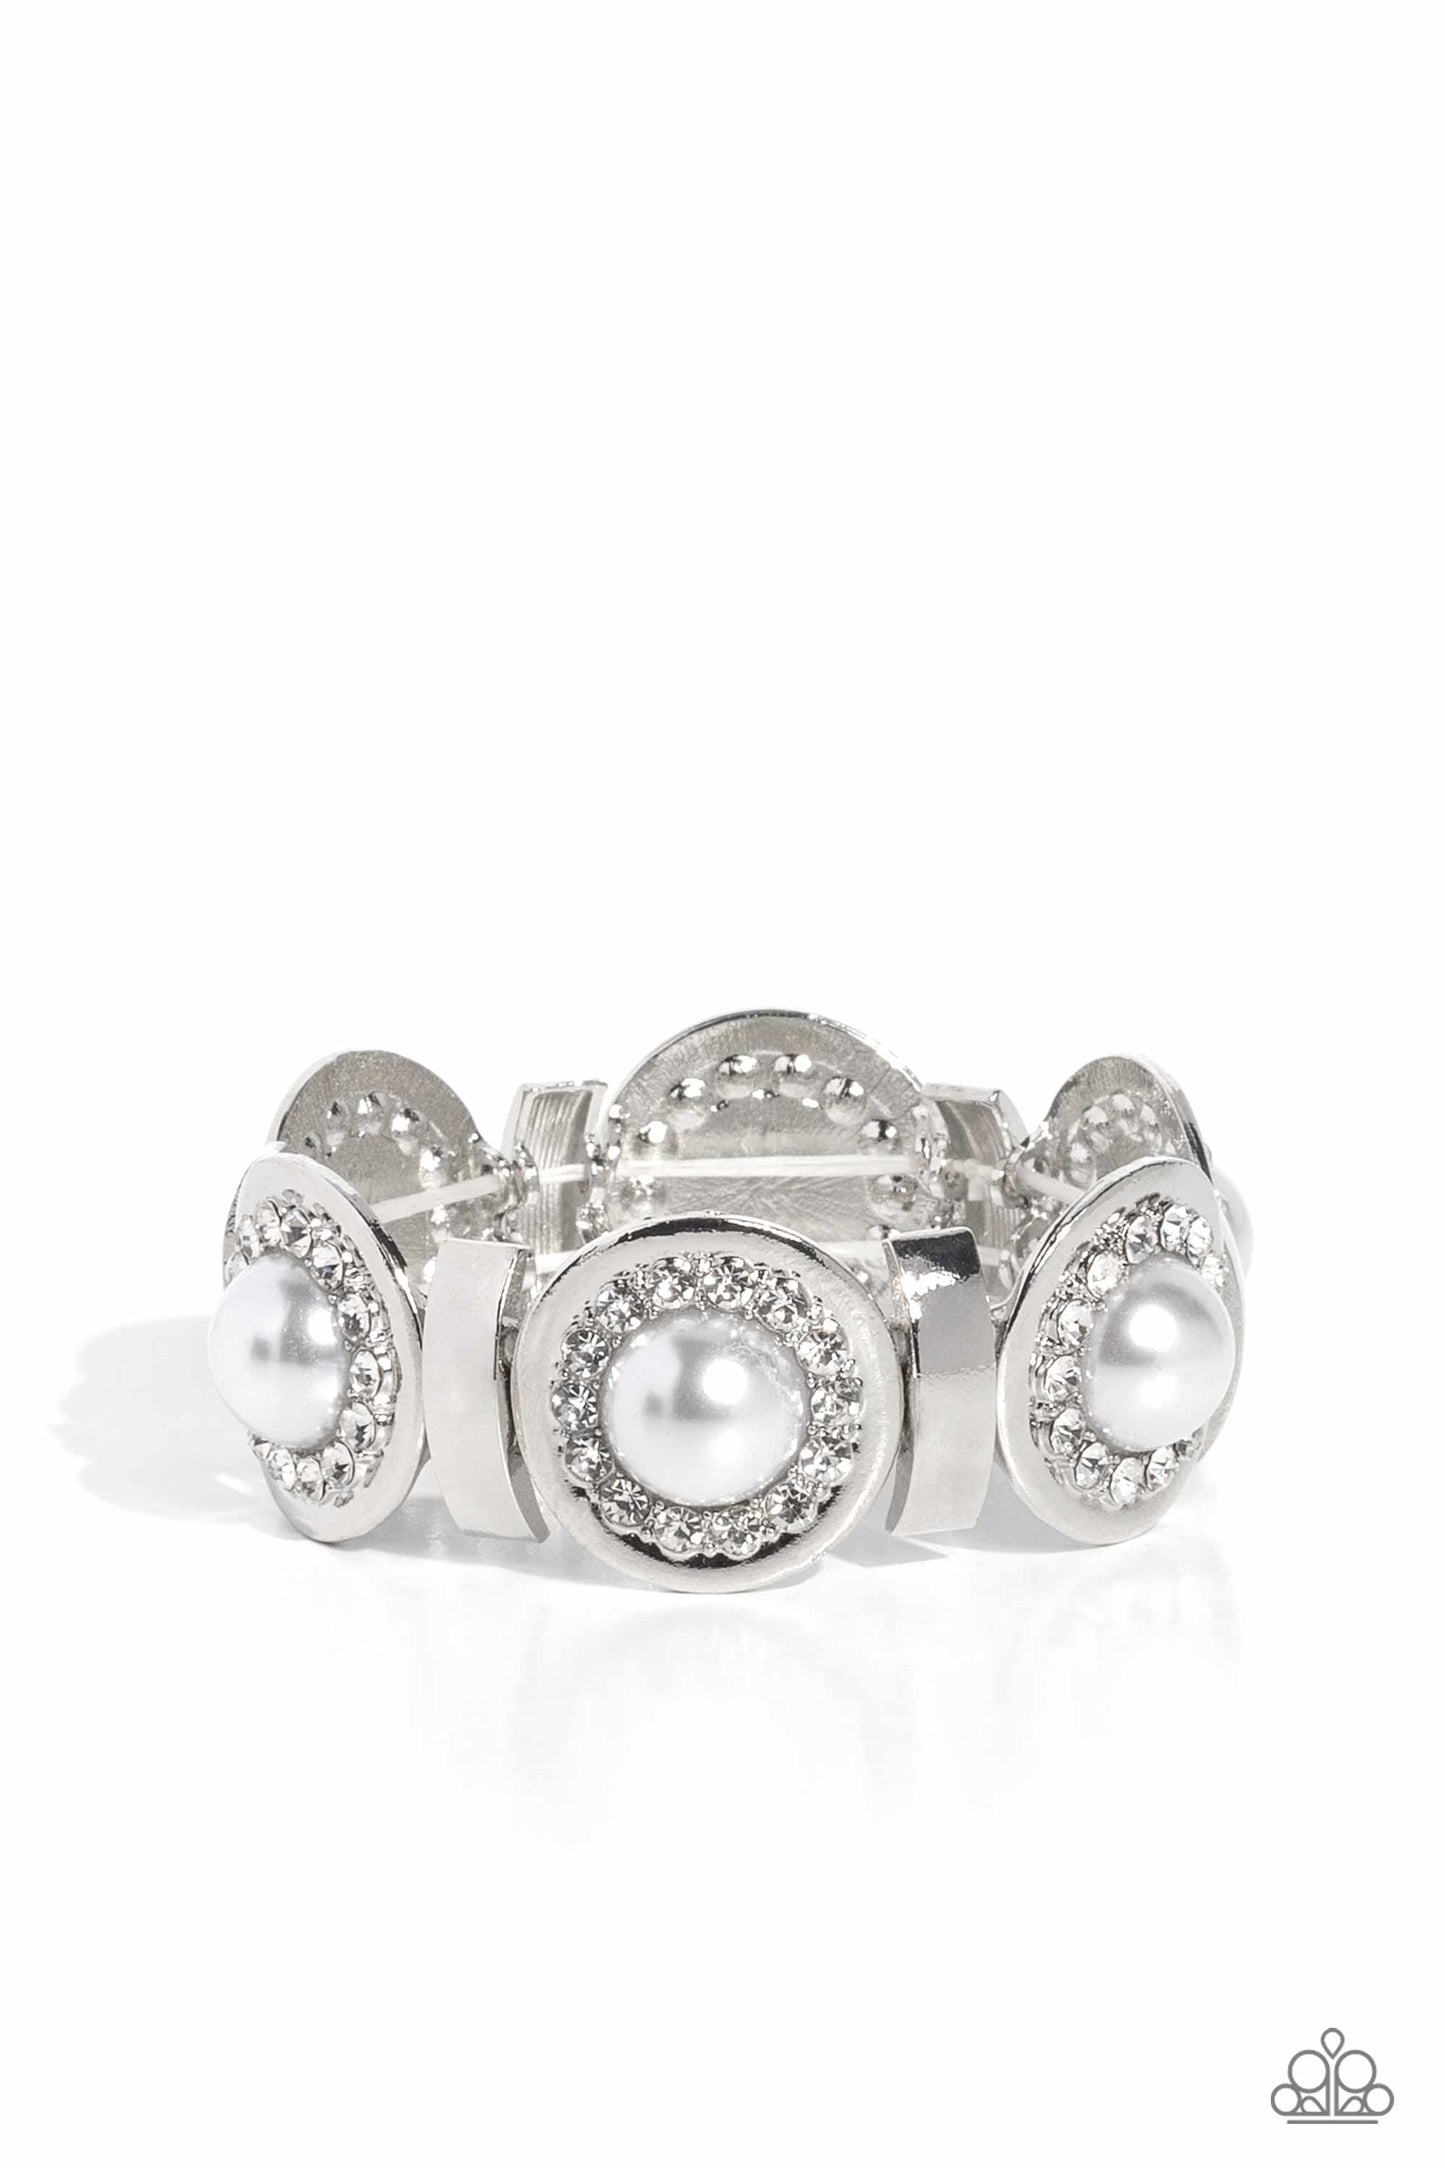 Paparazzi Accessories - Summer Serenade - White Pearl June 2023 LOP Bracelet boncaved silver frames, with an embossed row of white gems, encircle an oversized pearl center creating refined flowers. Sleek curls of silver alternate between the bejeweled flowers for additional shine and capricious shimmer along the wrist on stretchy bands.  Sold as one individual bracelet.